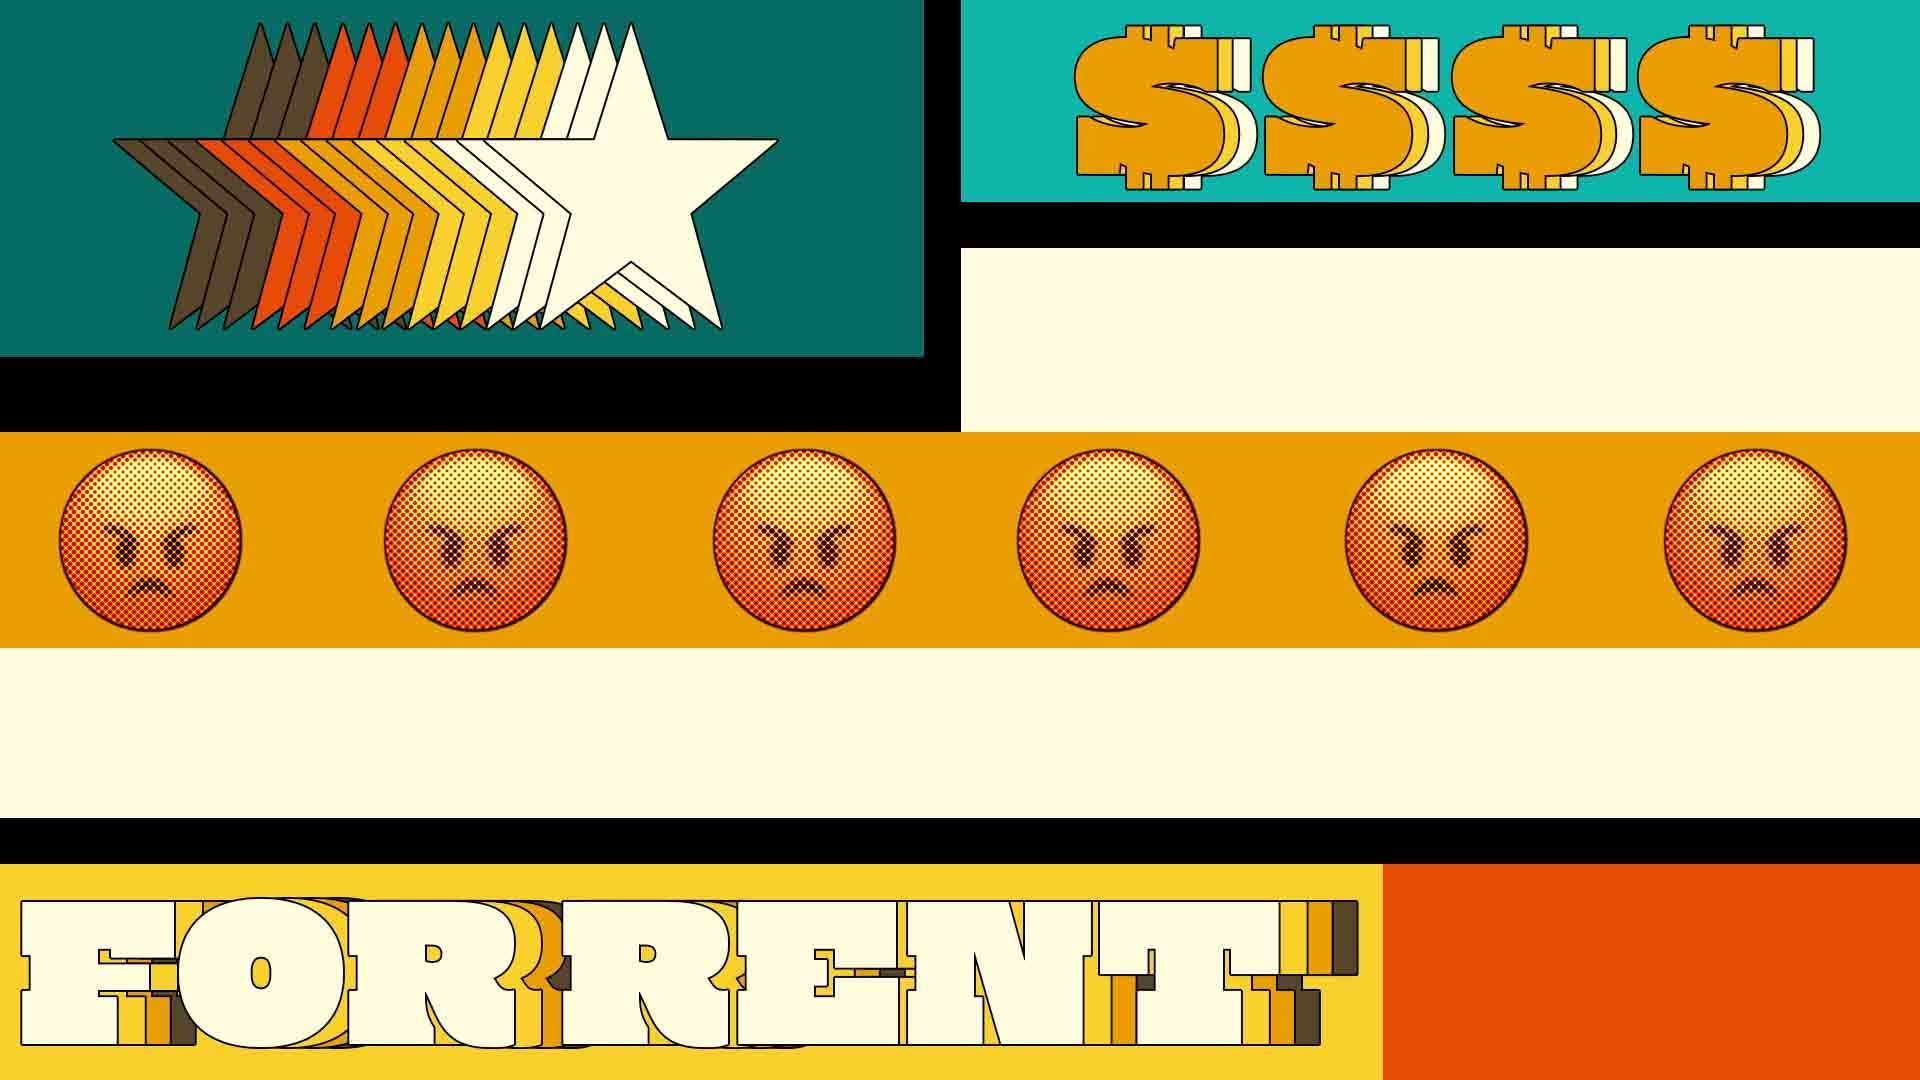 Illustration of stars, dollar signs, the words "for rent," and angry emojis on a background resembling the U.S. flag